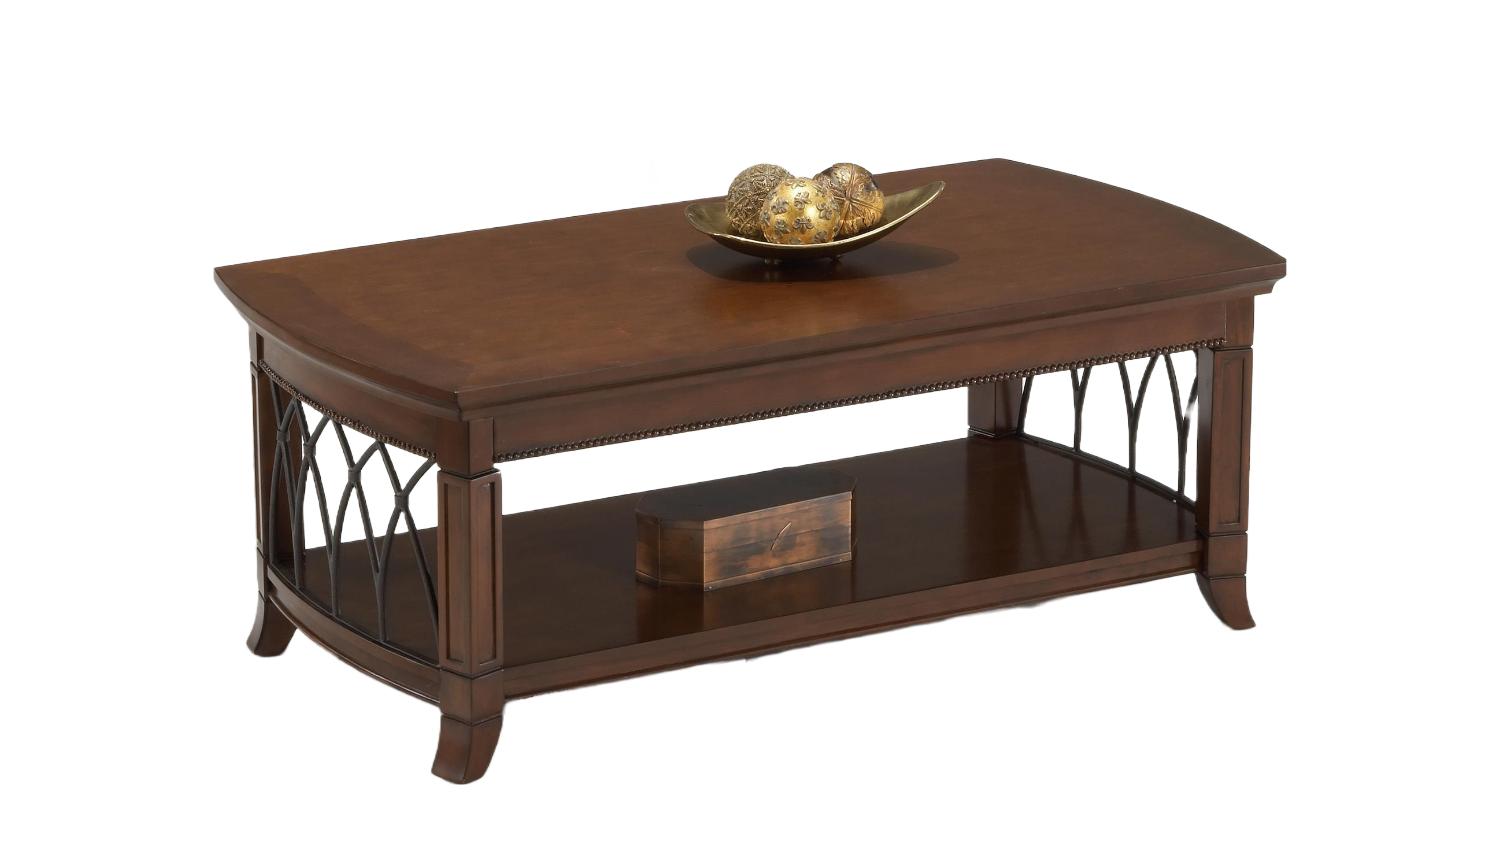 Contemporary, Transitional Coffee Table CATHEDRAL 8620 8620 in Brown 